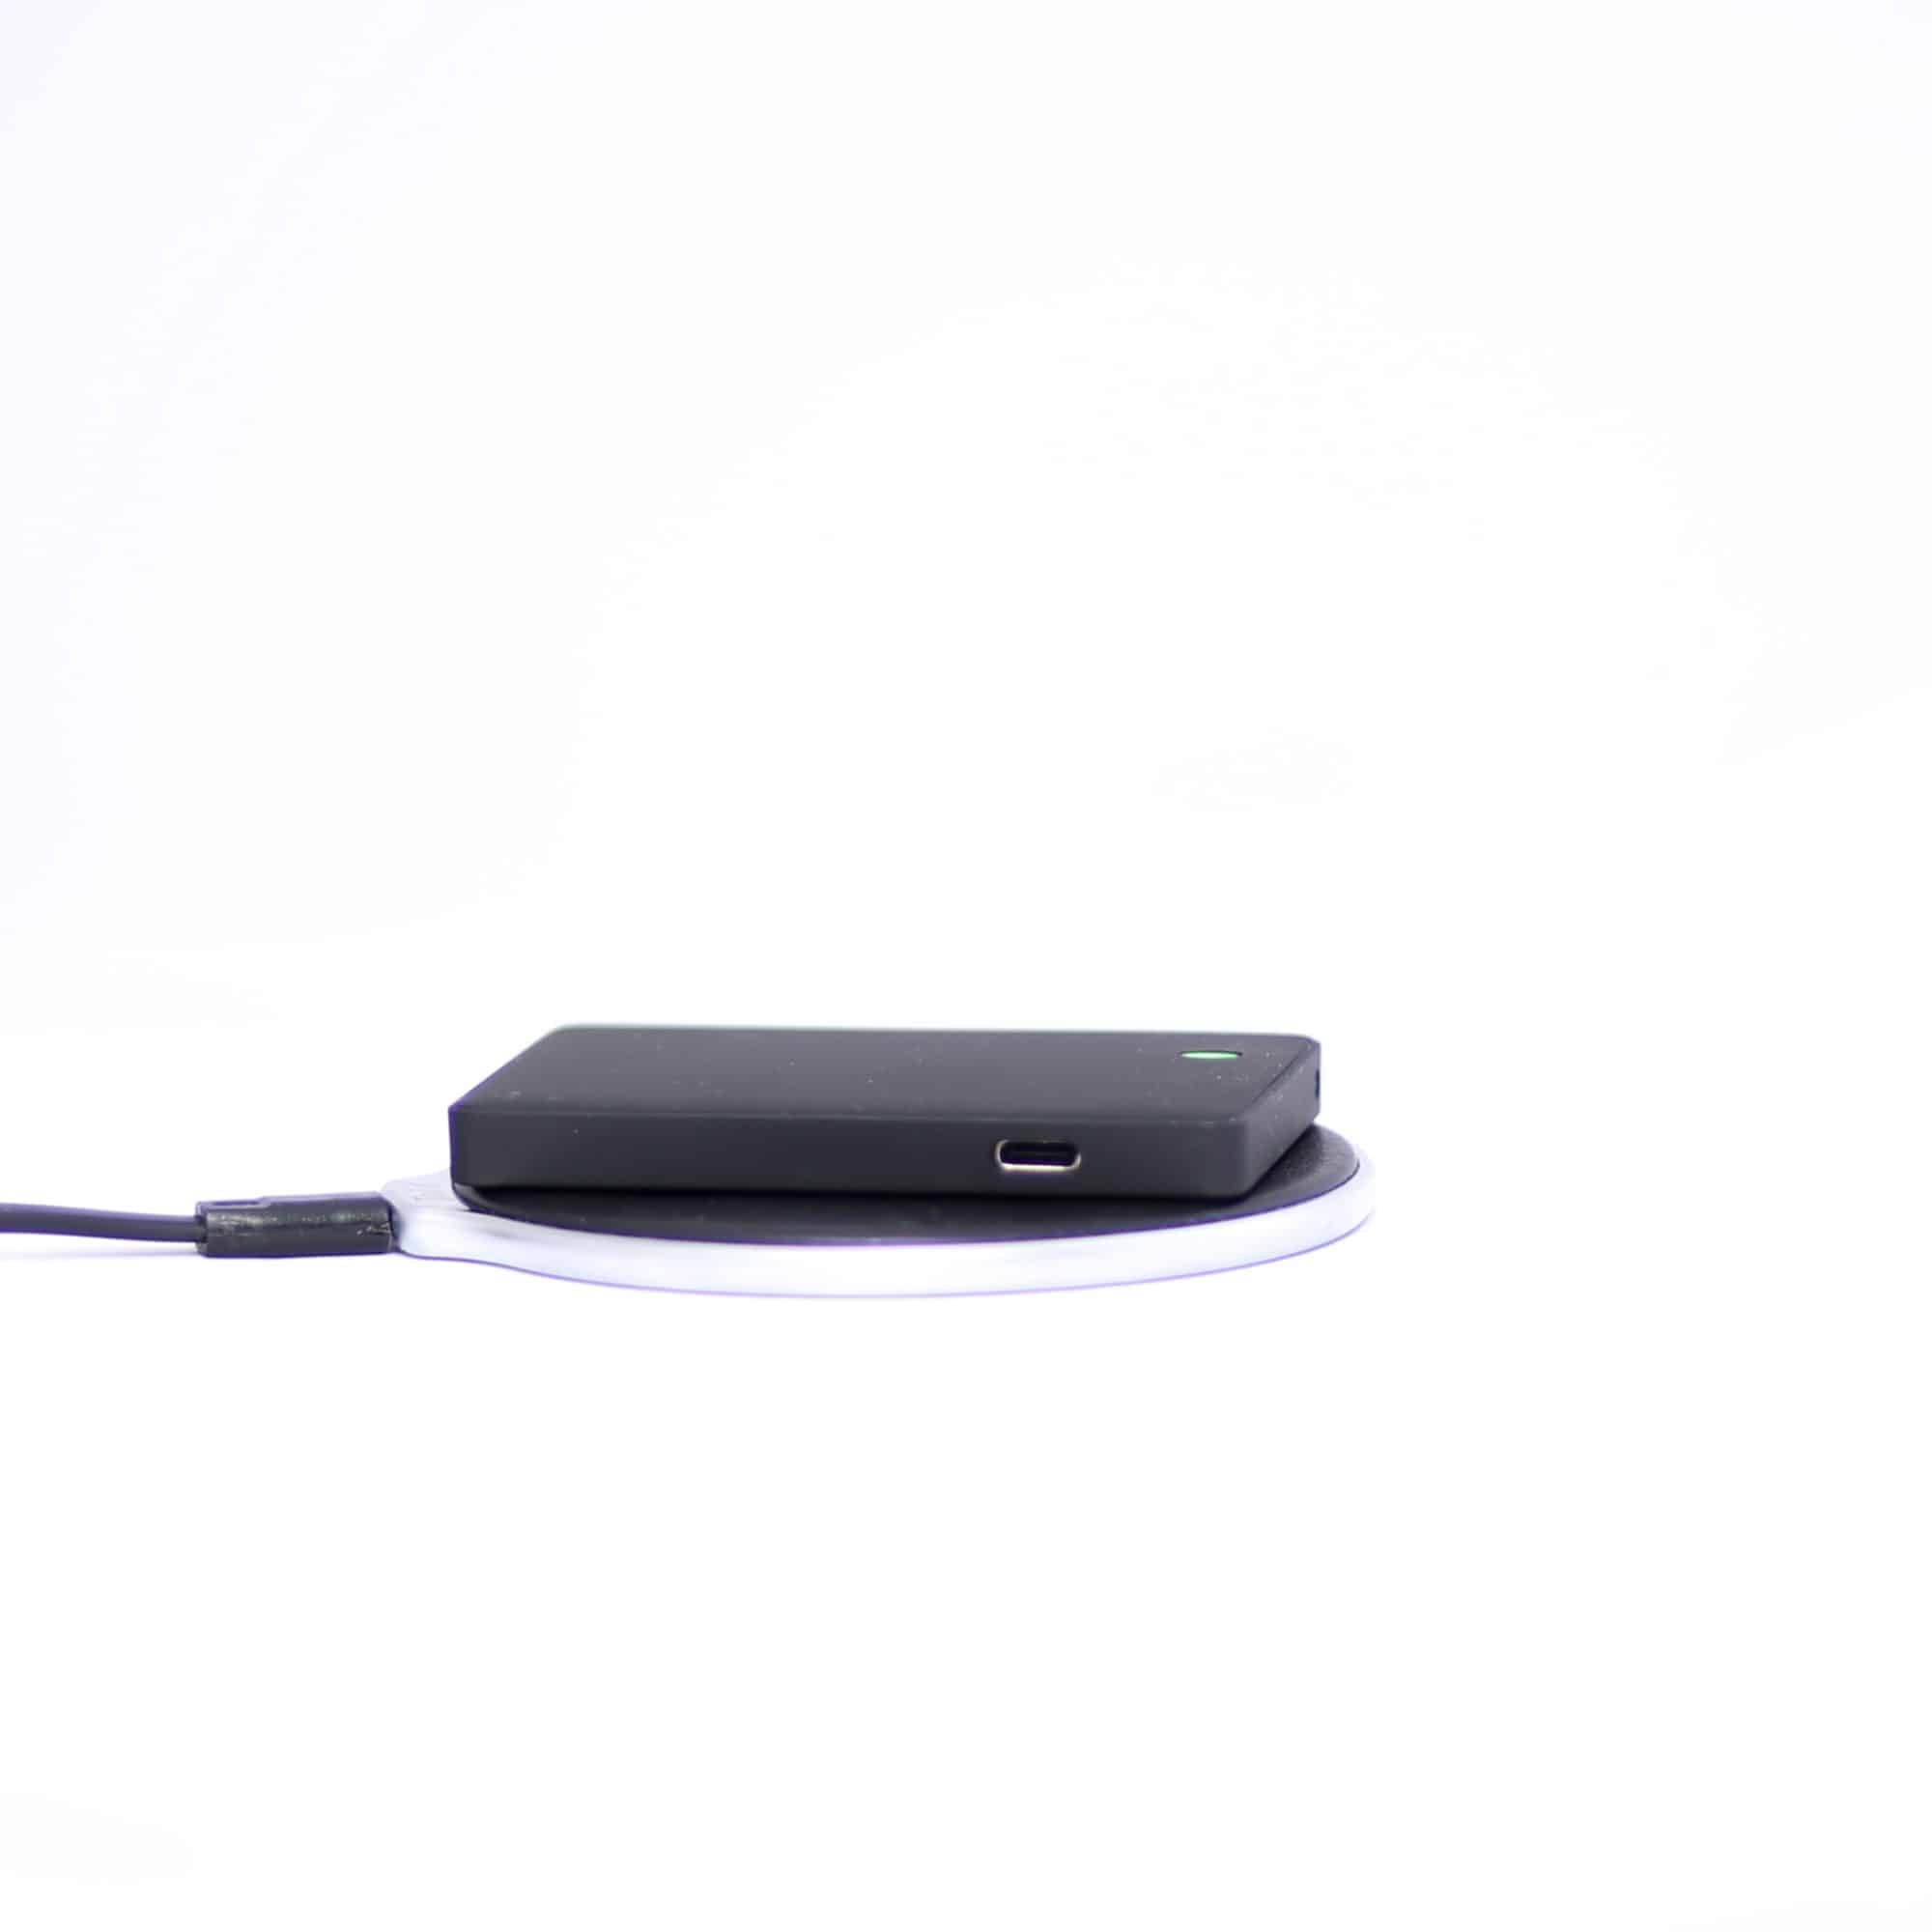 Tail It Worlds Thinnest GPS Tracker Weeks Battery